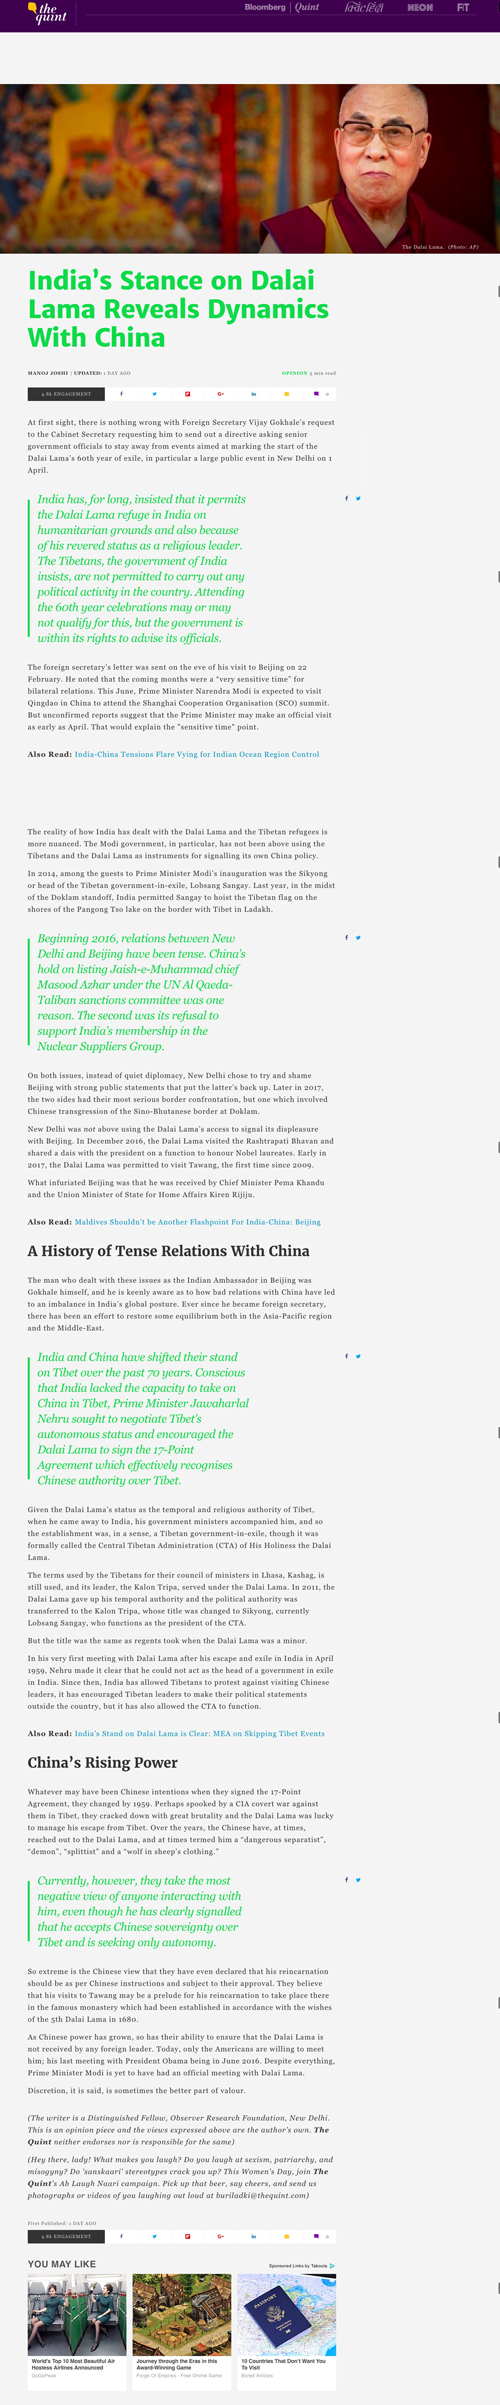 Click to enlarge (Source: https://www.thequint.com/voices/opinion/opinion-dalai-lama-mea-indian-govt-60-years-exile-event-china-tibet-relationship)